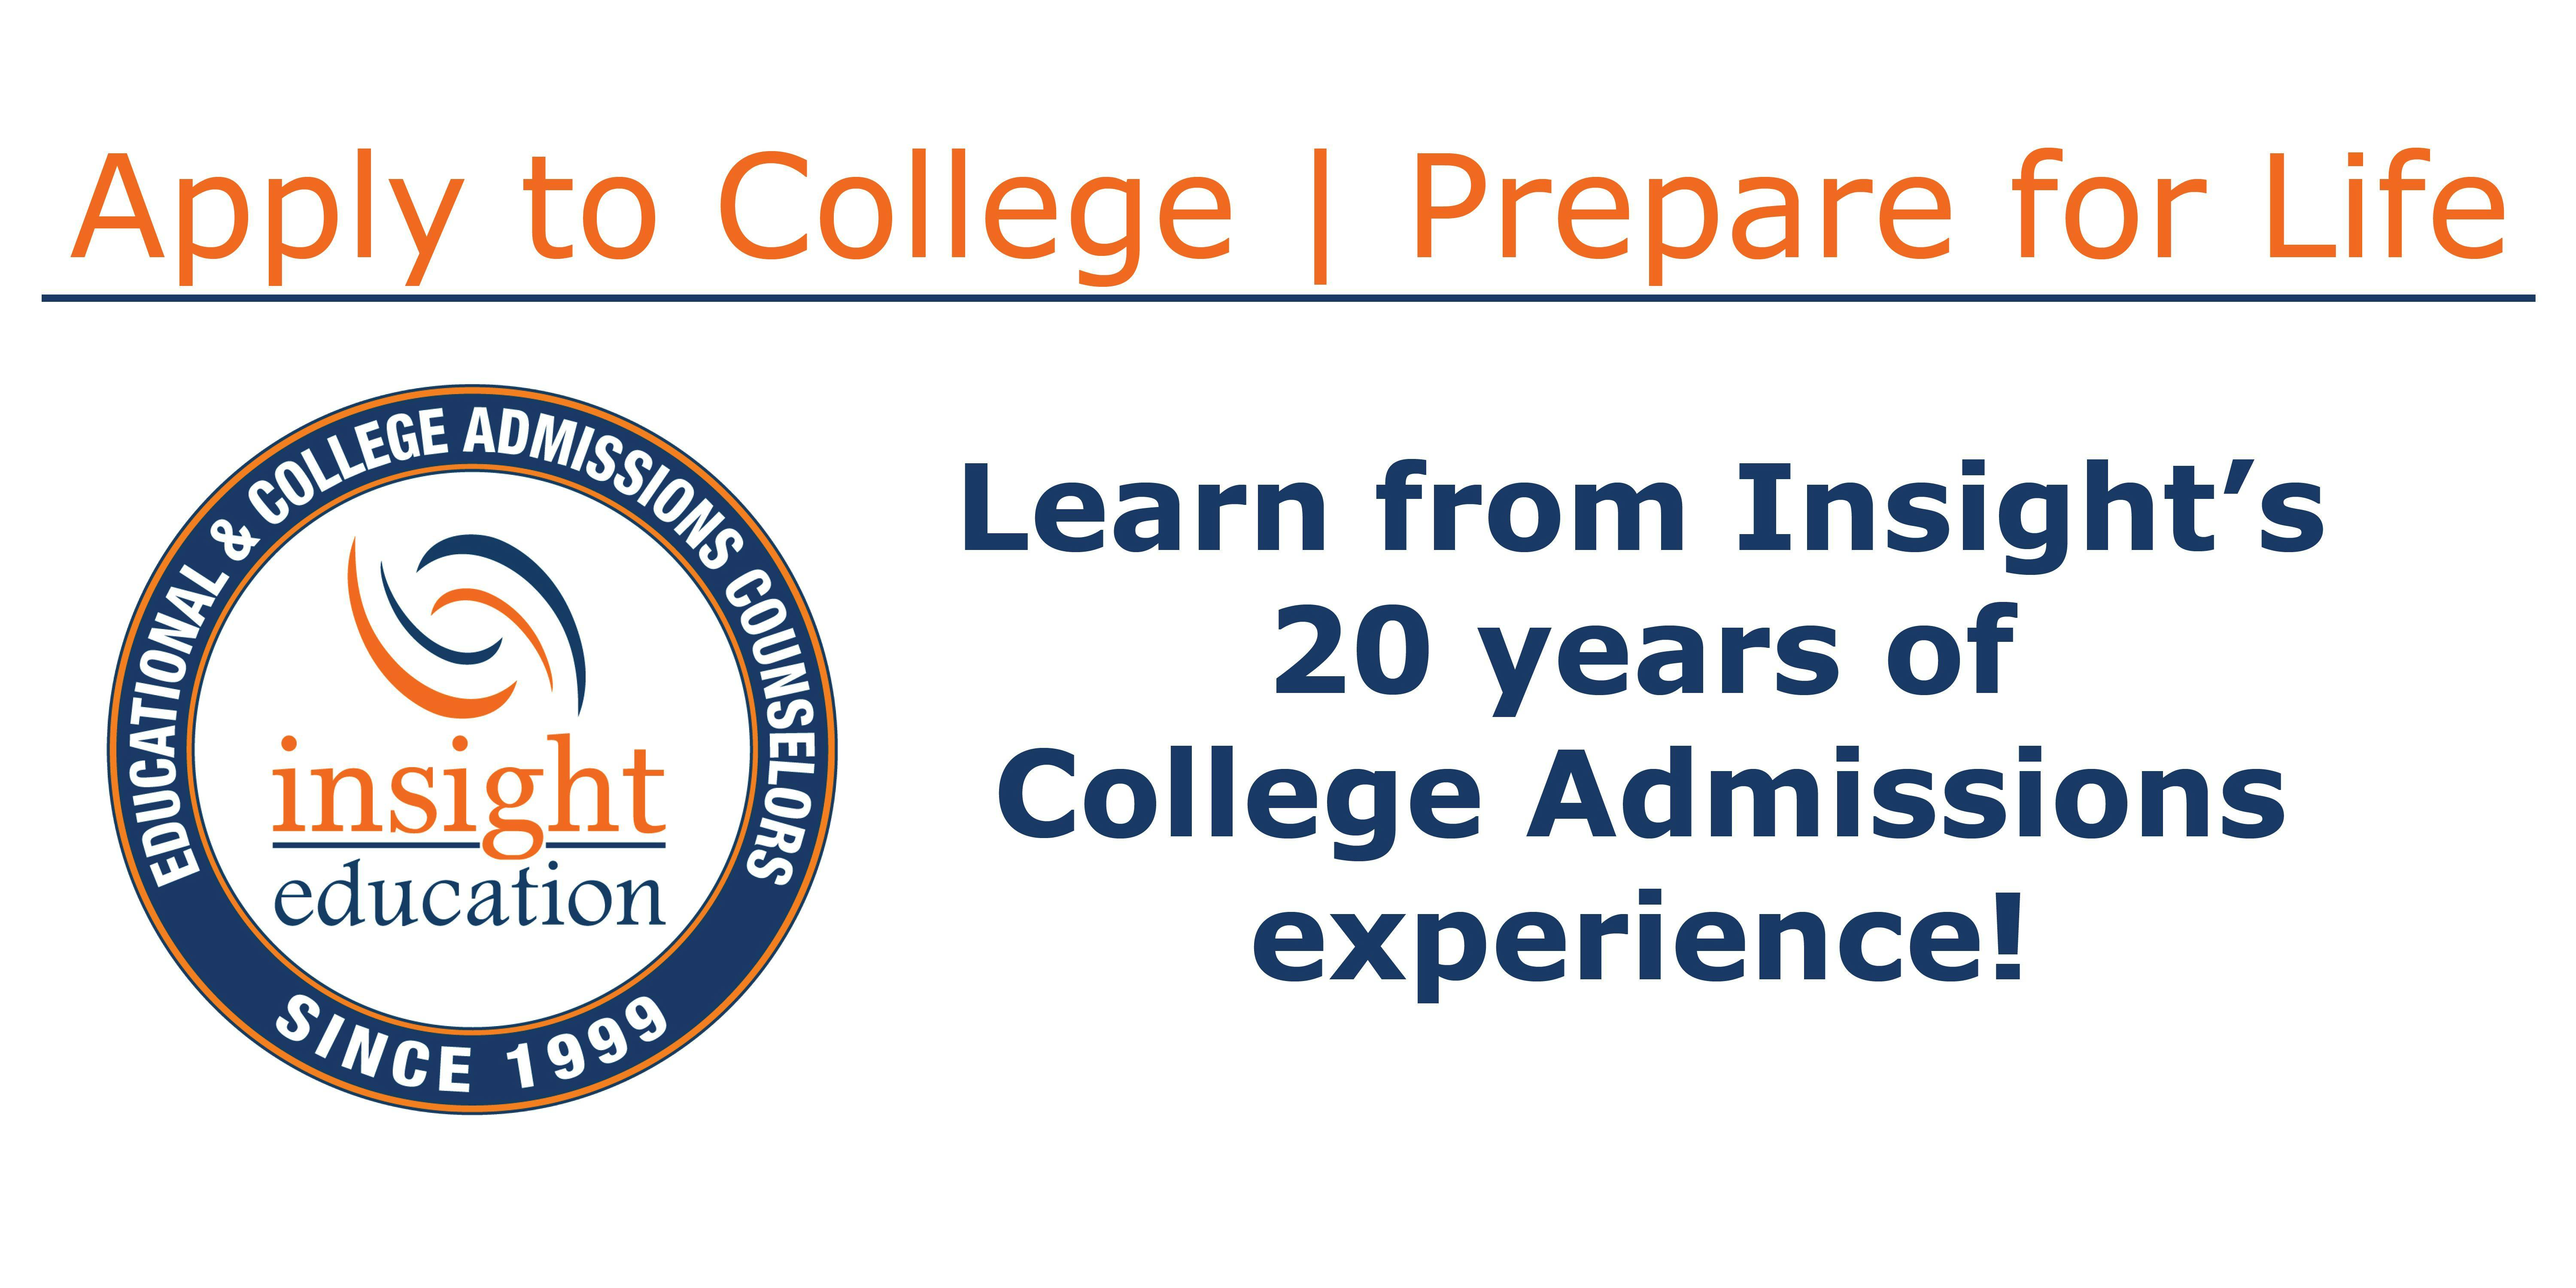 Apply to College, Prepare for Life: 20 Years of Insight Into the College Admissions Process